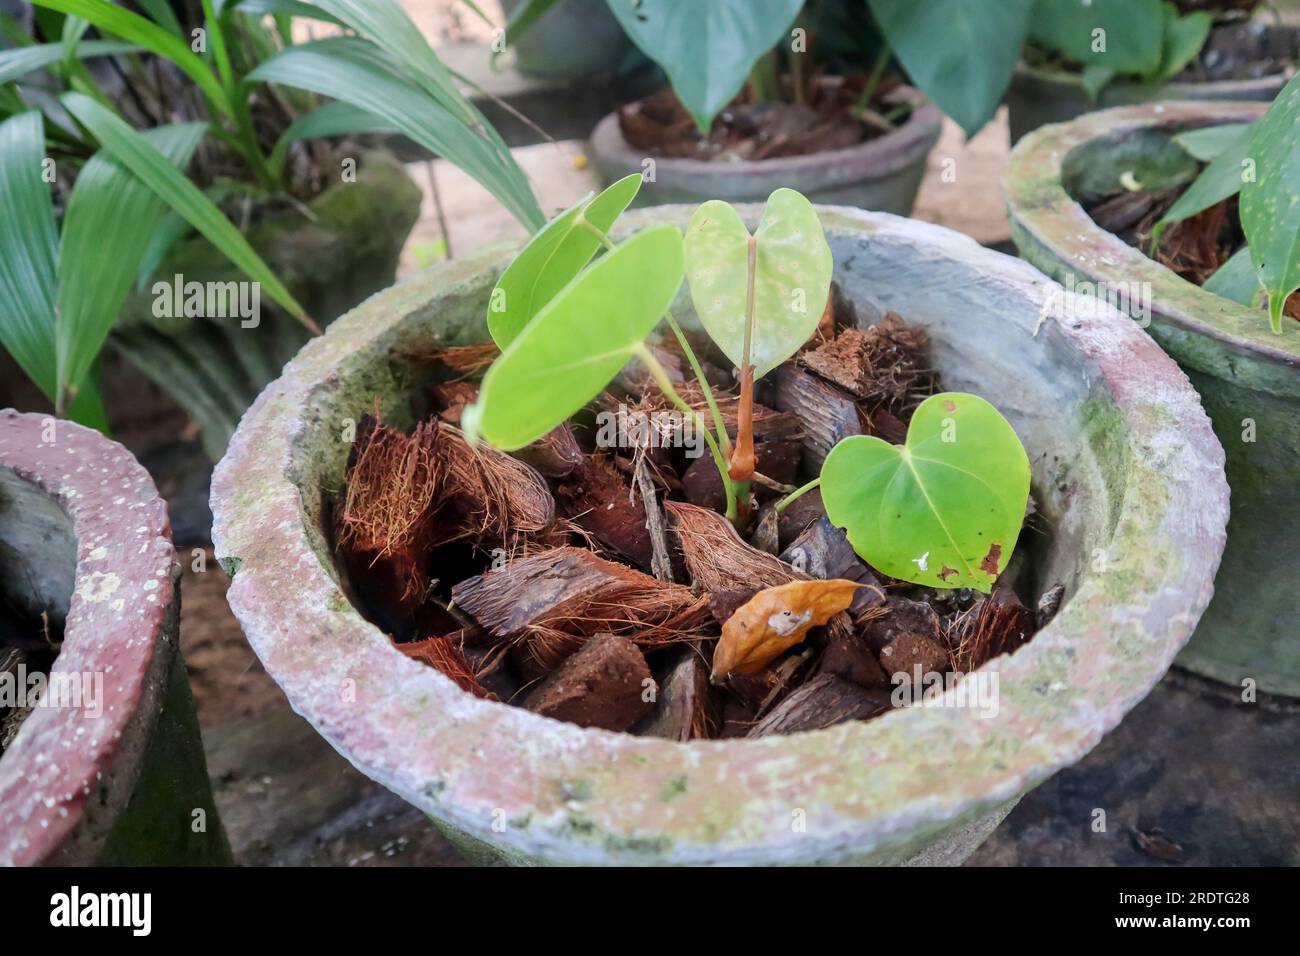 Shredded coconut in a pot with anthurian plant Stock Photo